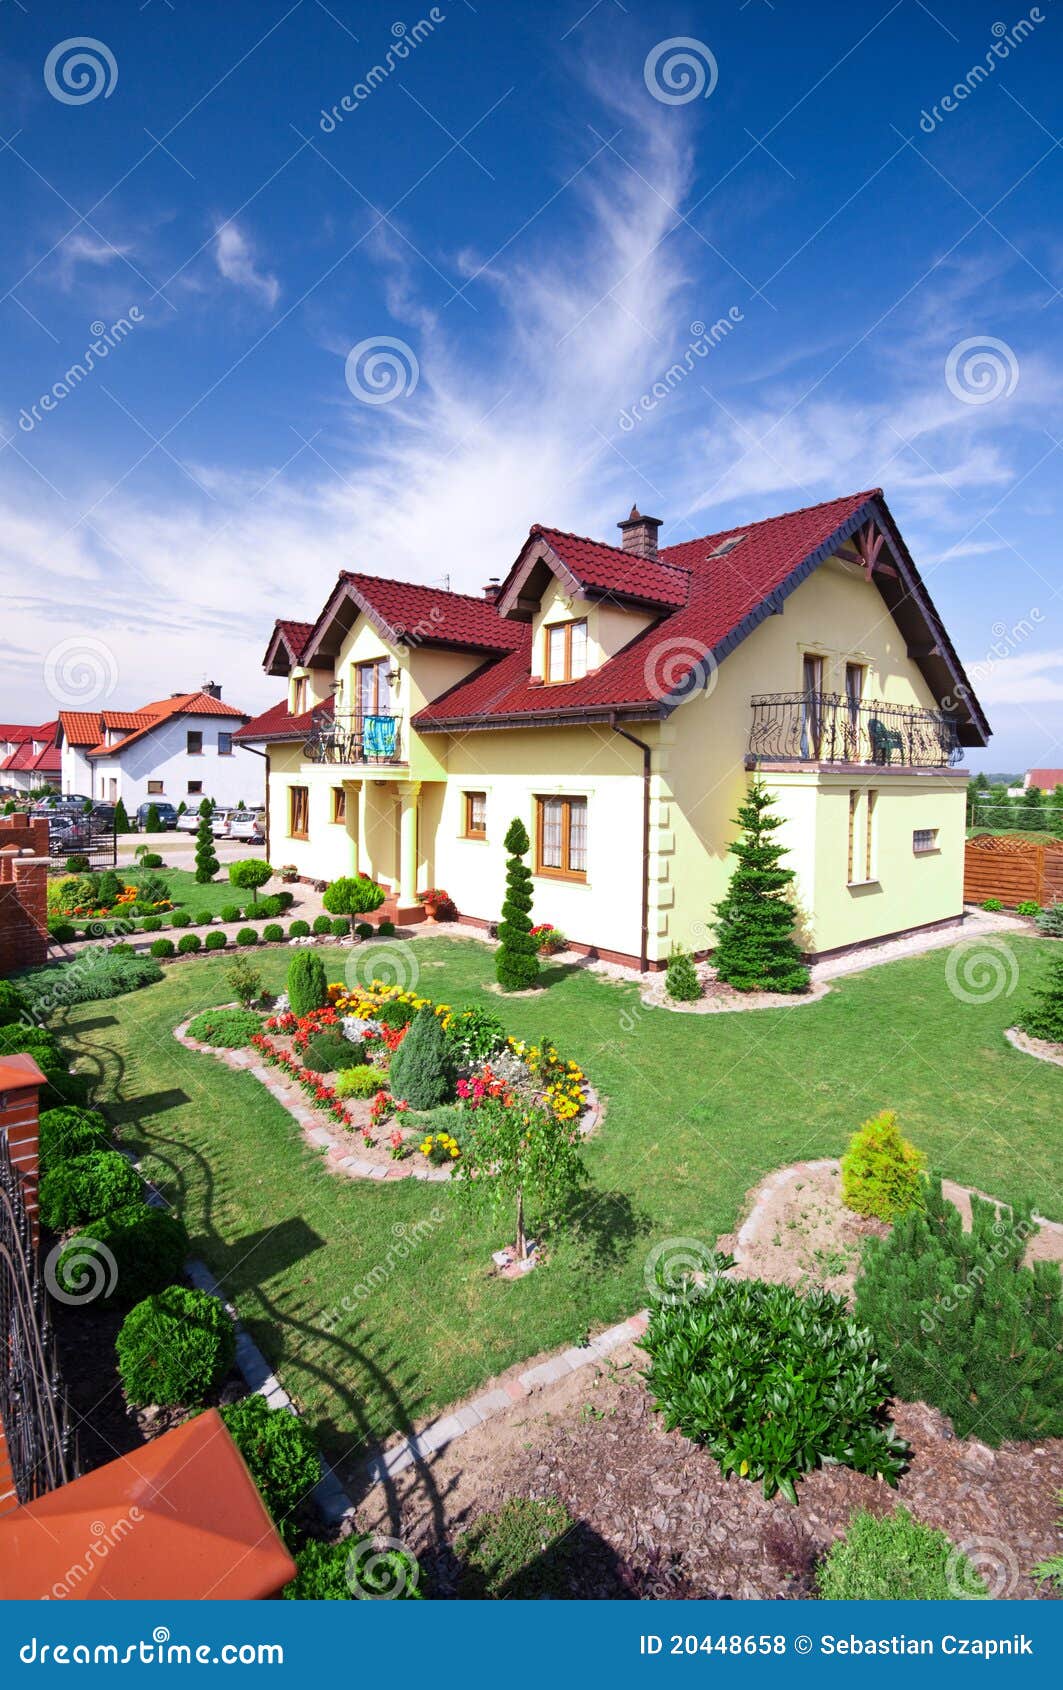 house with landscaped yard